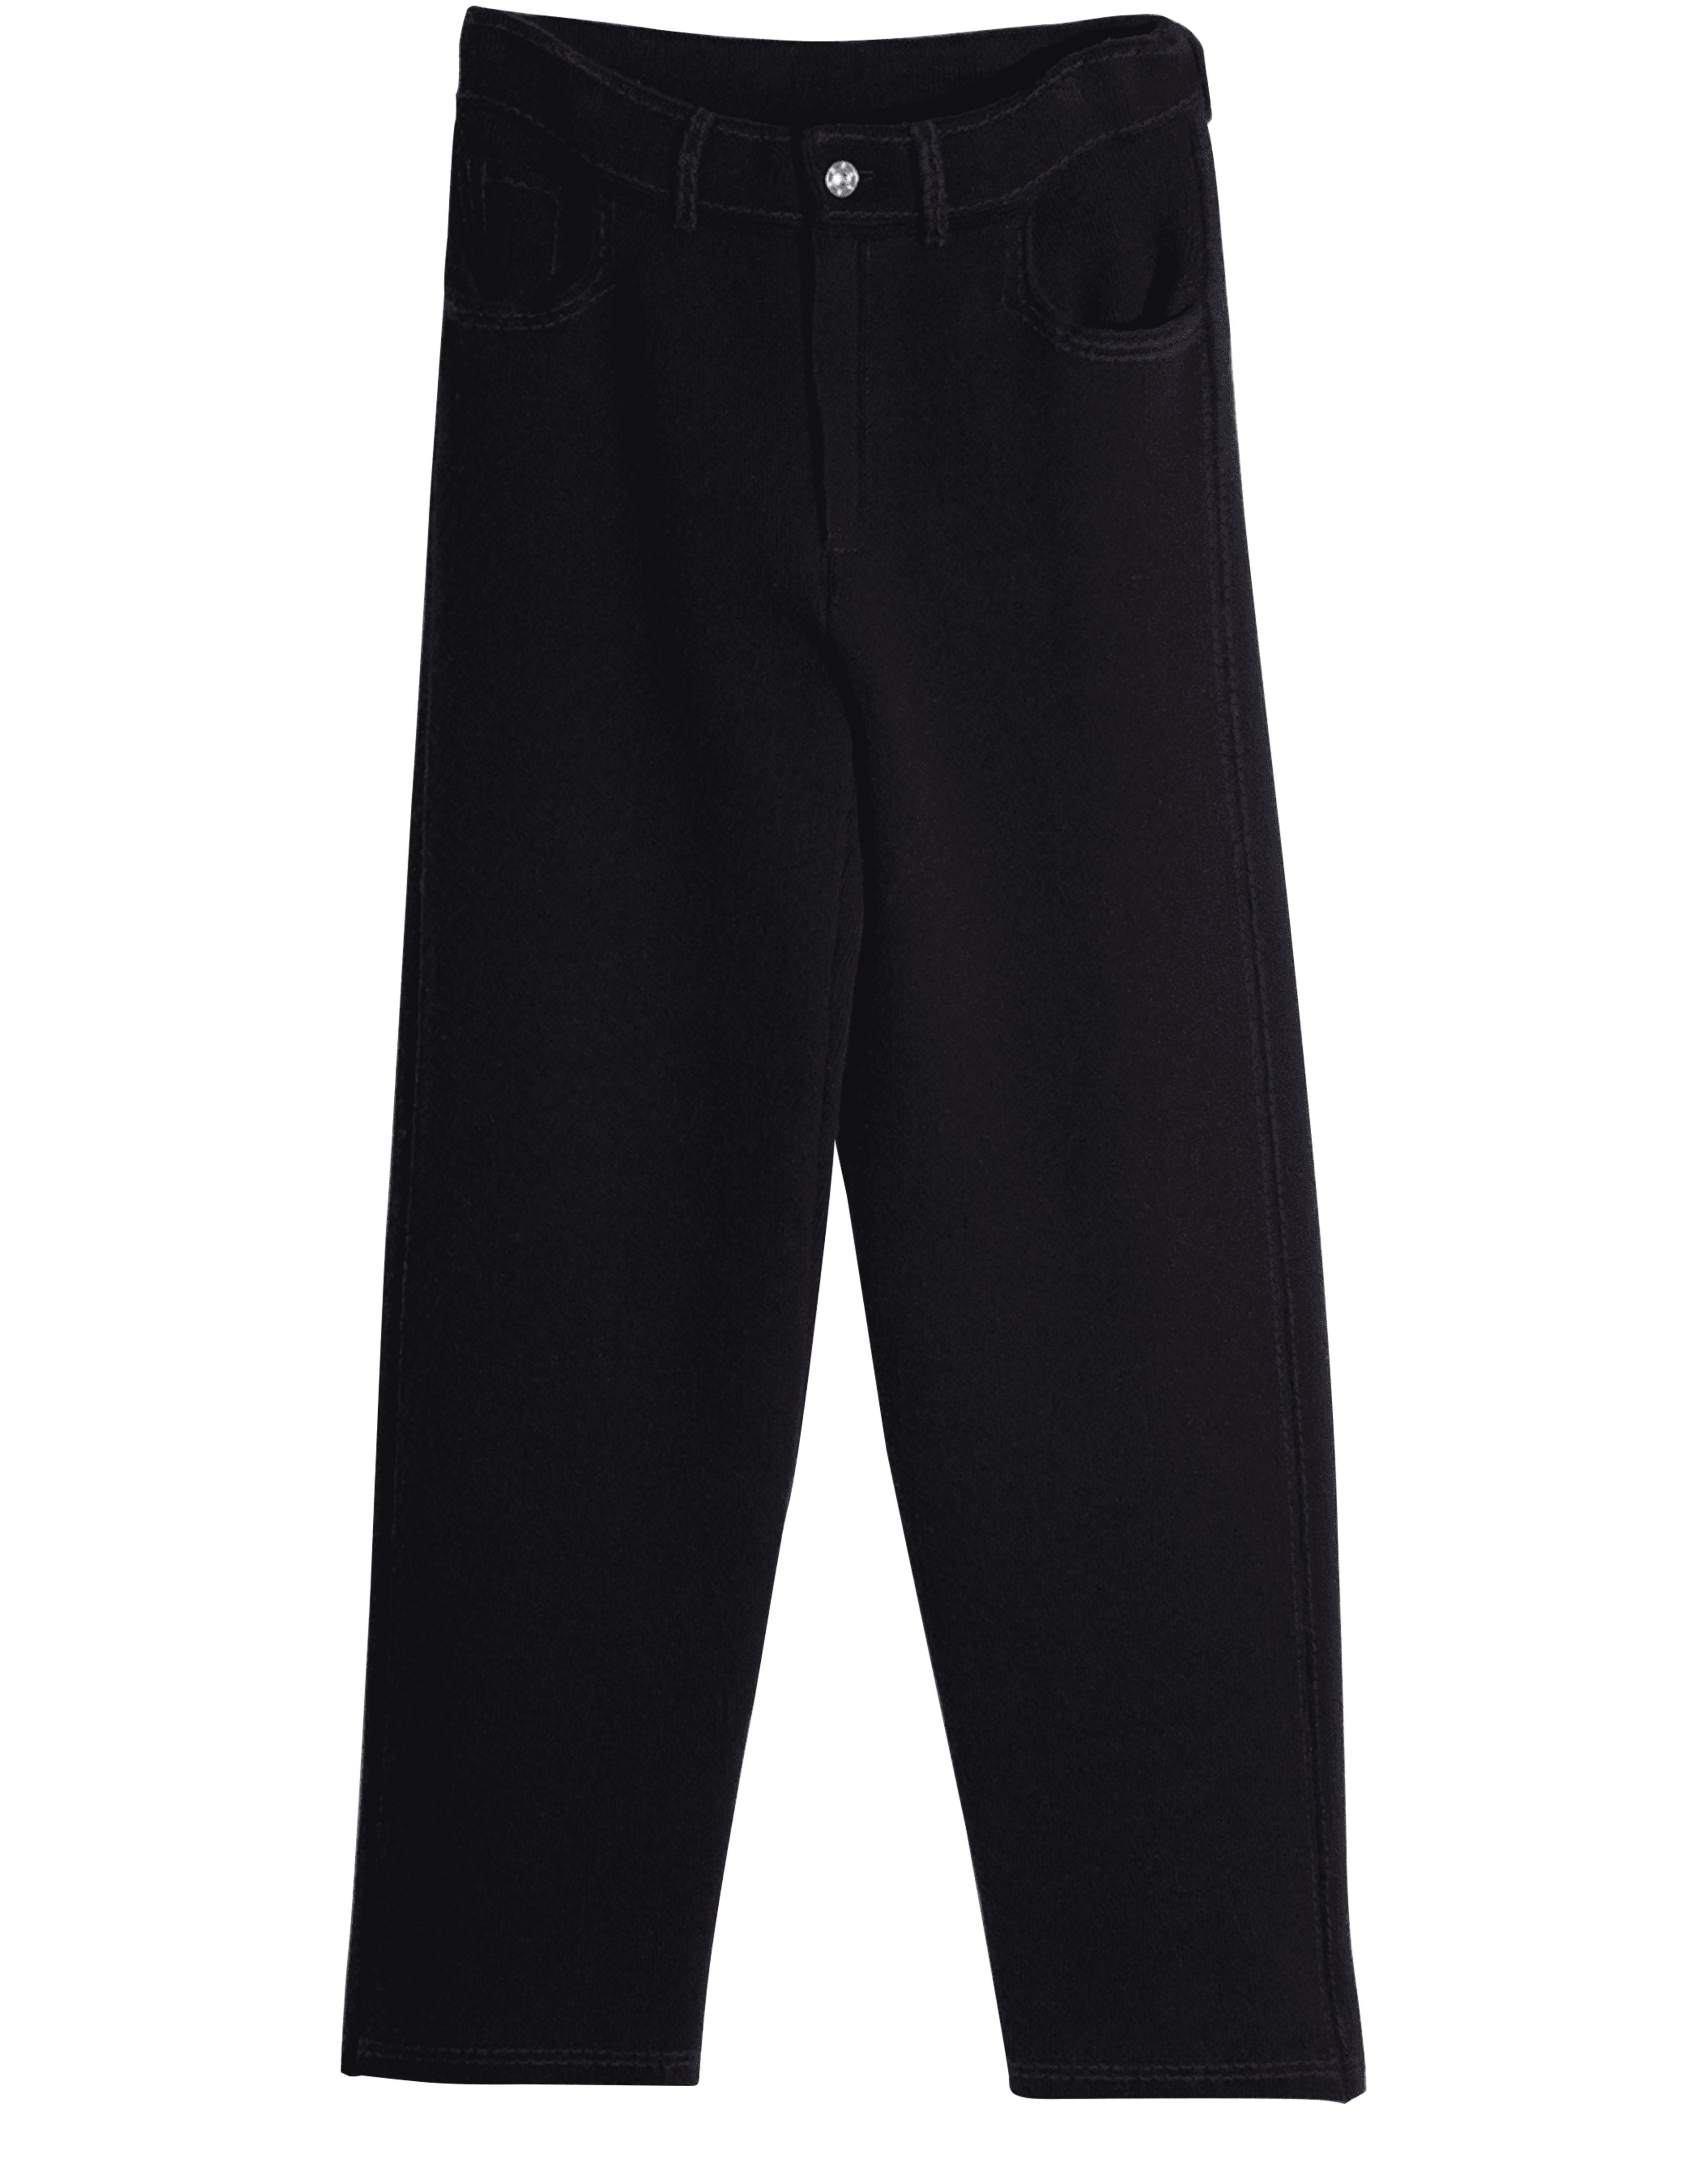 Barrie Denim cashmere and cotton trousers